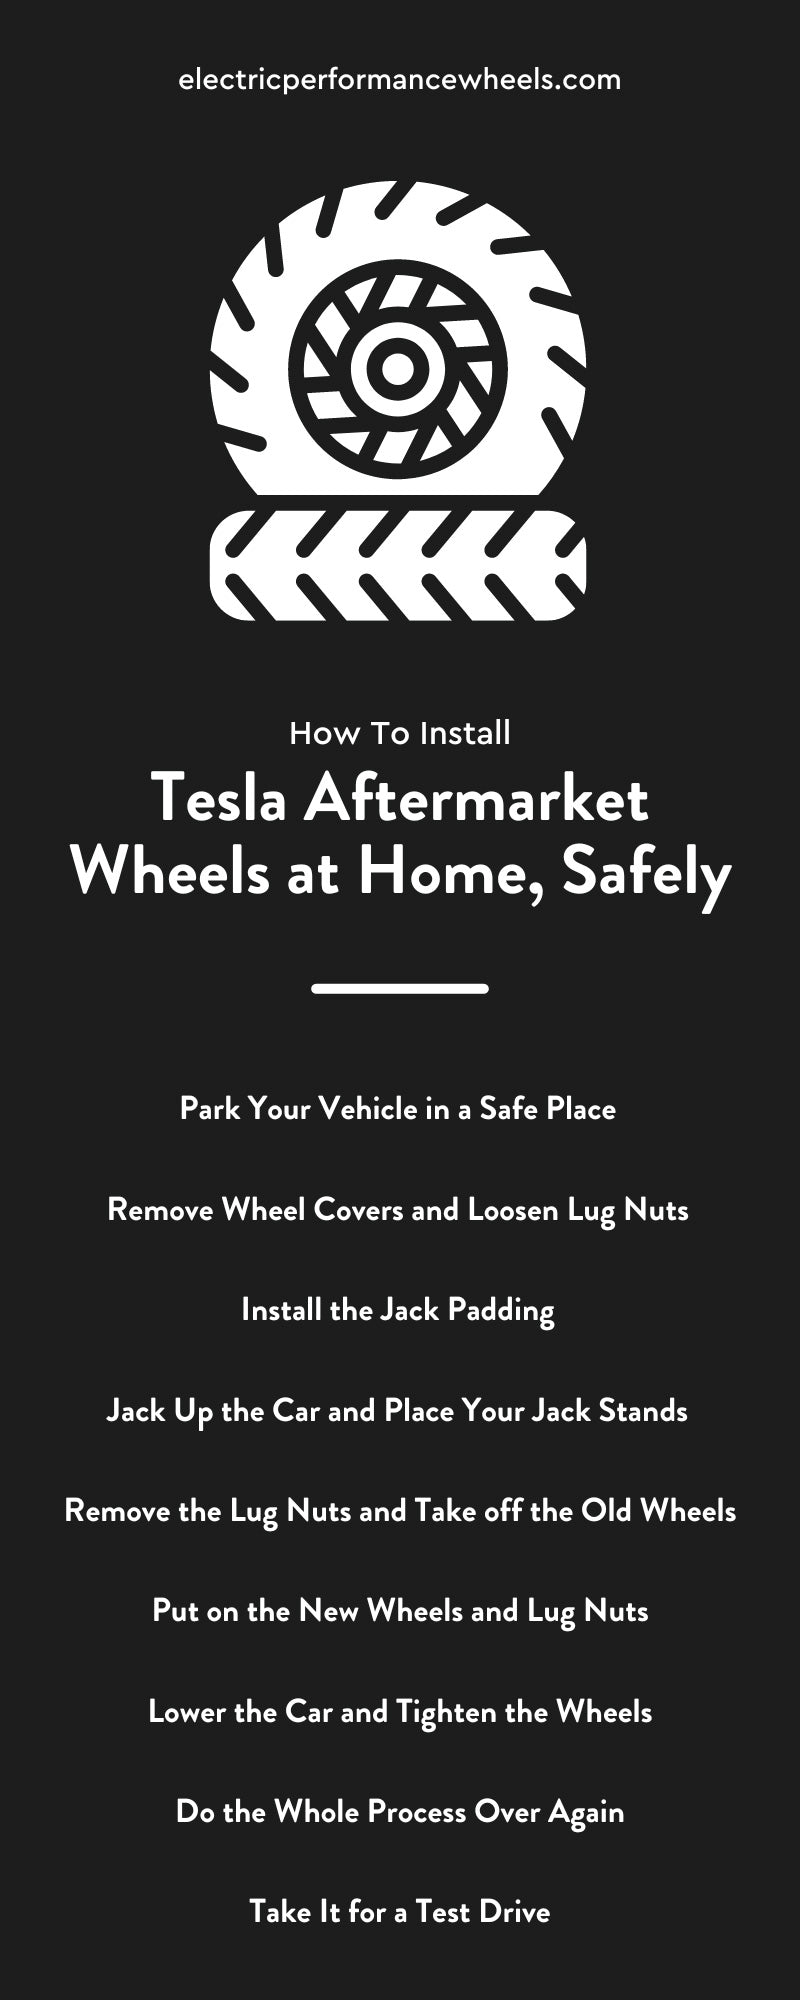 How To Install Tesla Aftermarket Wheels at Home, Safely